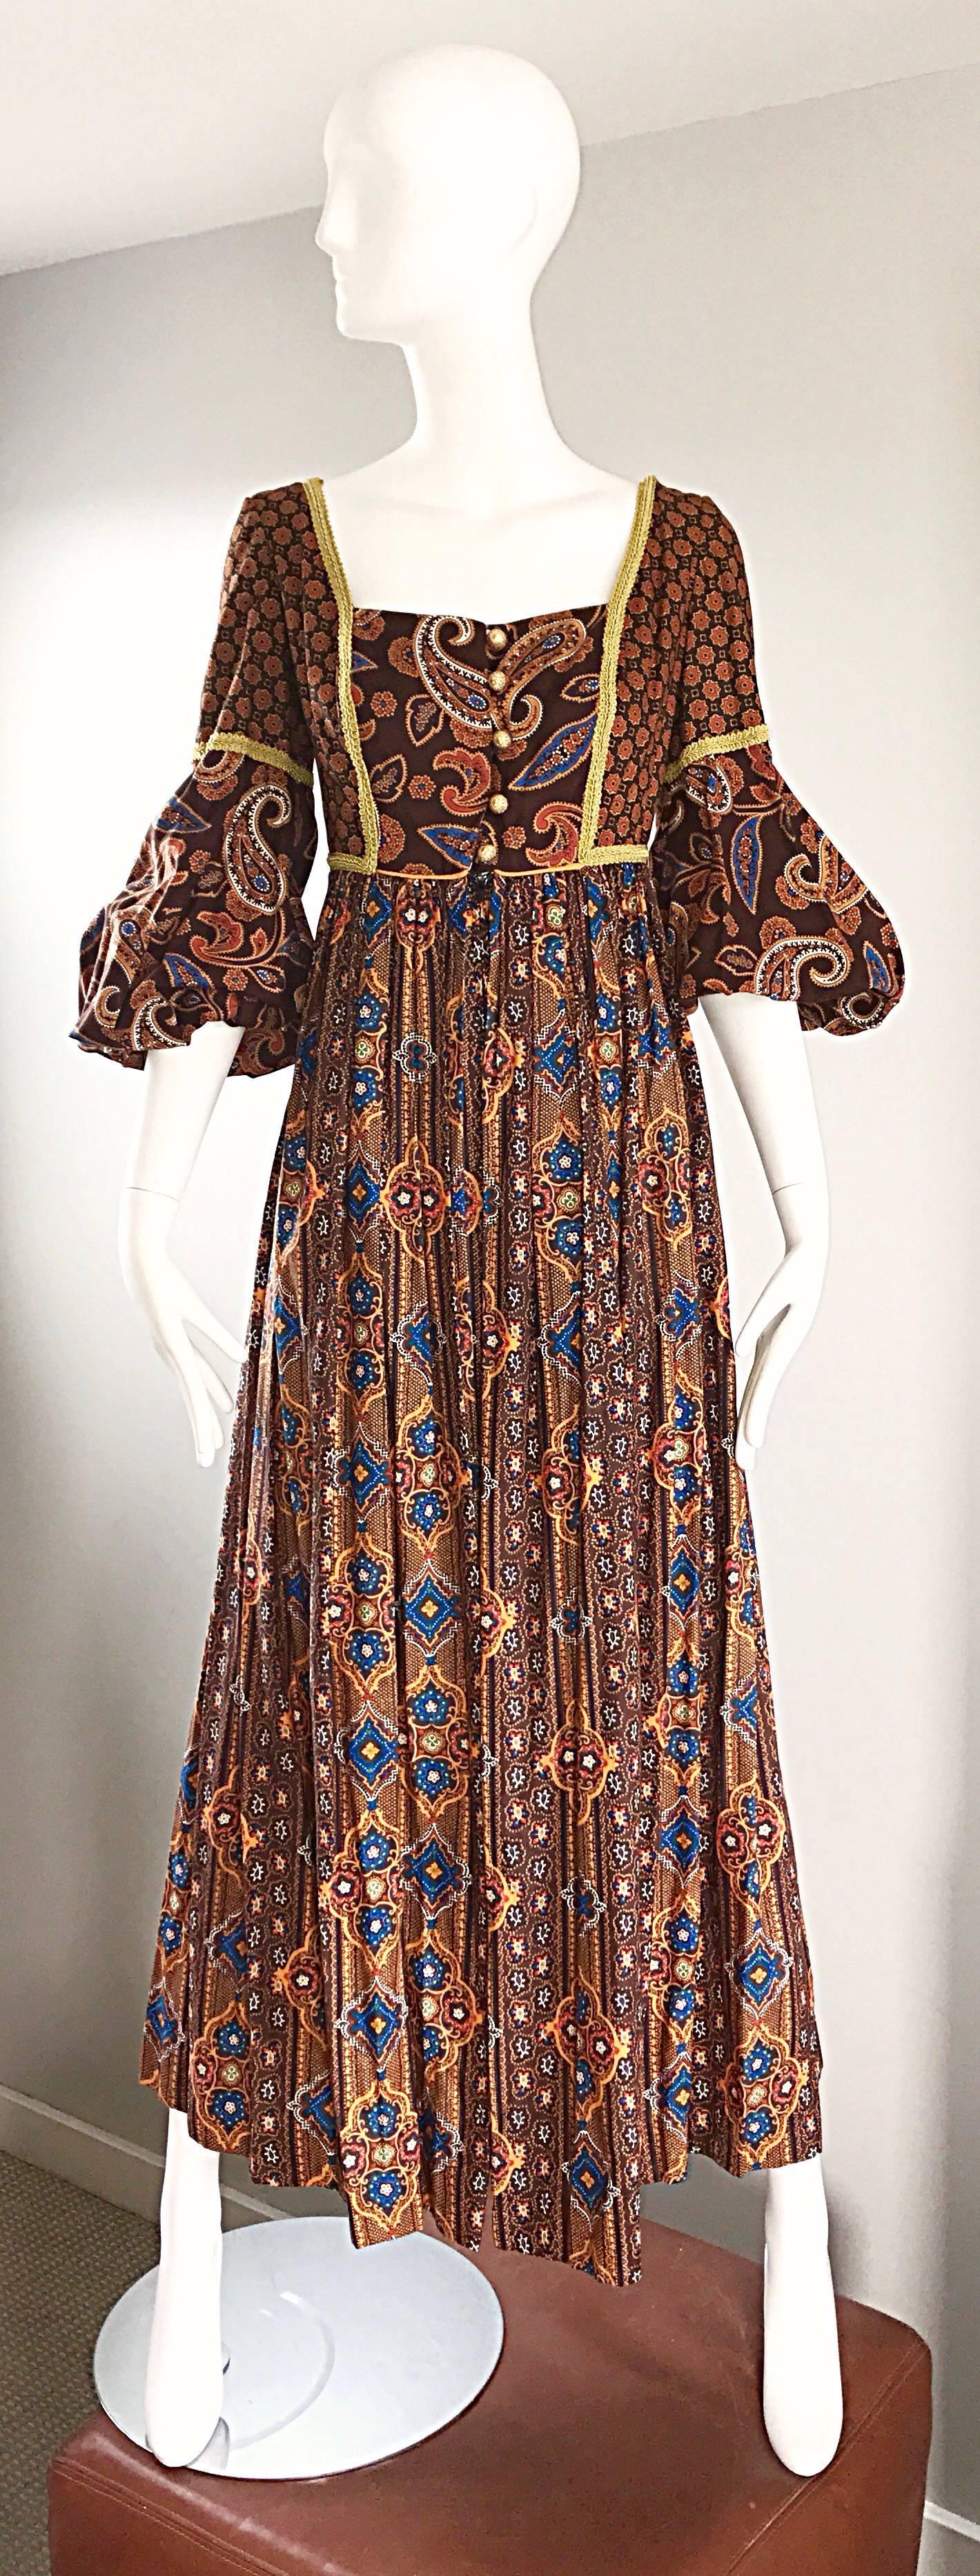 Fantastic 1970s JAY MORLEY for FERN VIOLETTE boho peasant maxi dress! Jay Morley pieces are rare to come by, and very sought after! Morley was a renowned Hollywood costume designer in the 1950s and 1960s. He had his own line under Fern Violette in